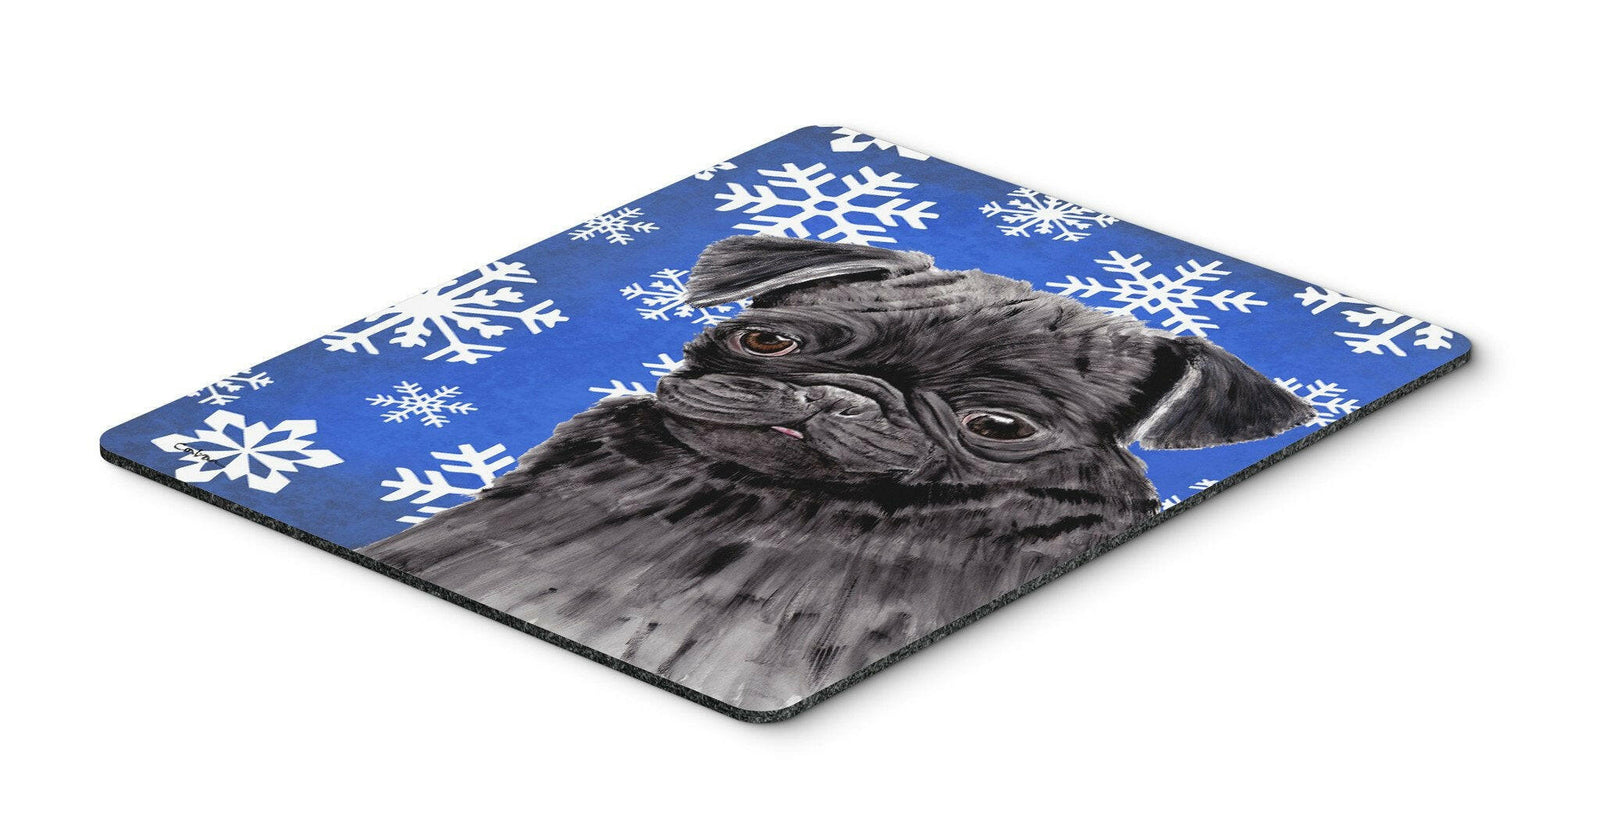 Pug Winter Snowflakes Holiday Mouse Pad, Hot Pad or Trivet by Caroline's Treasures